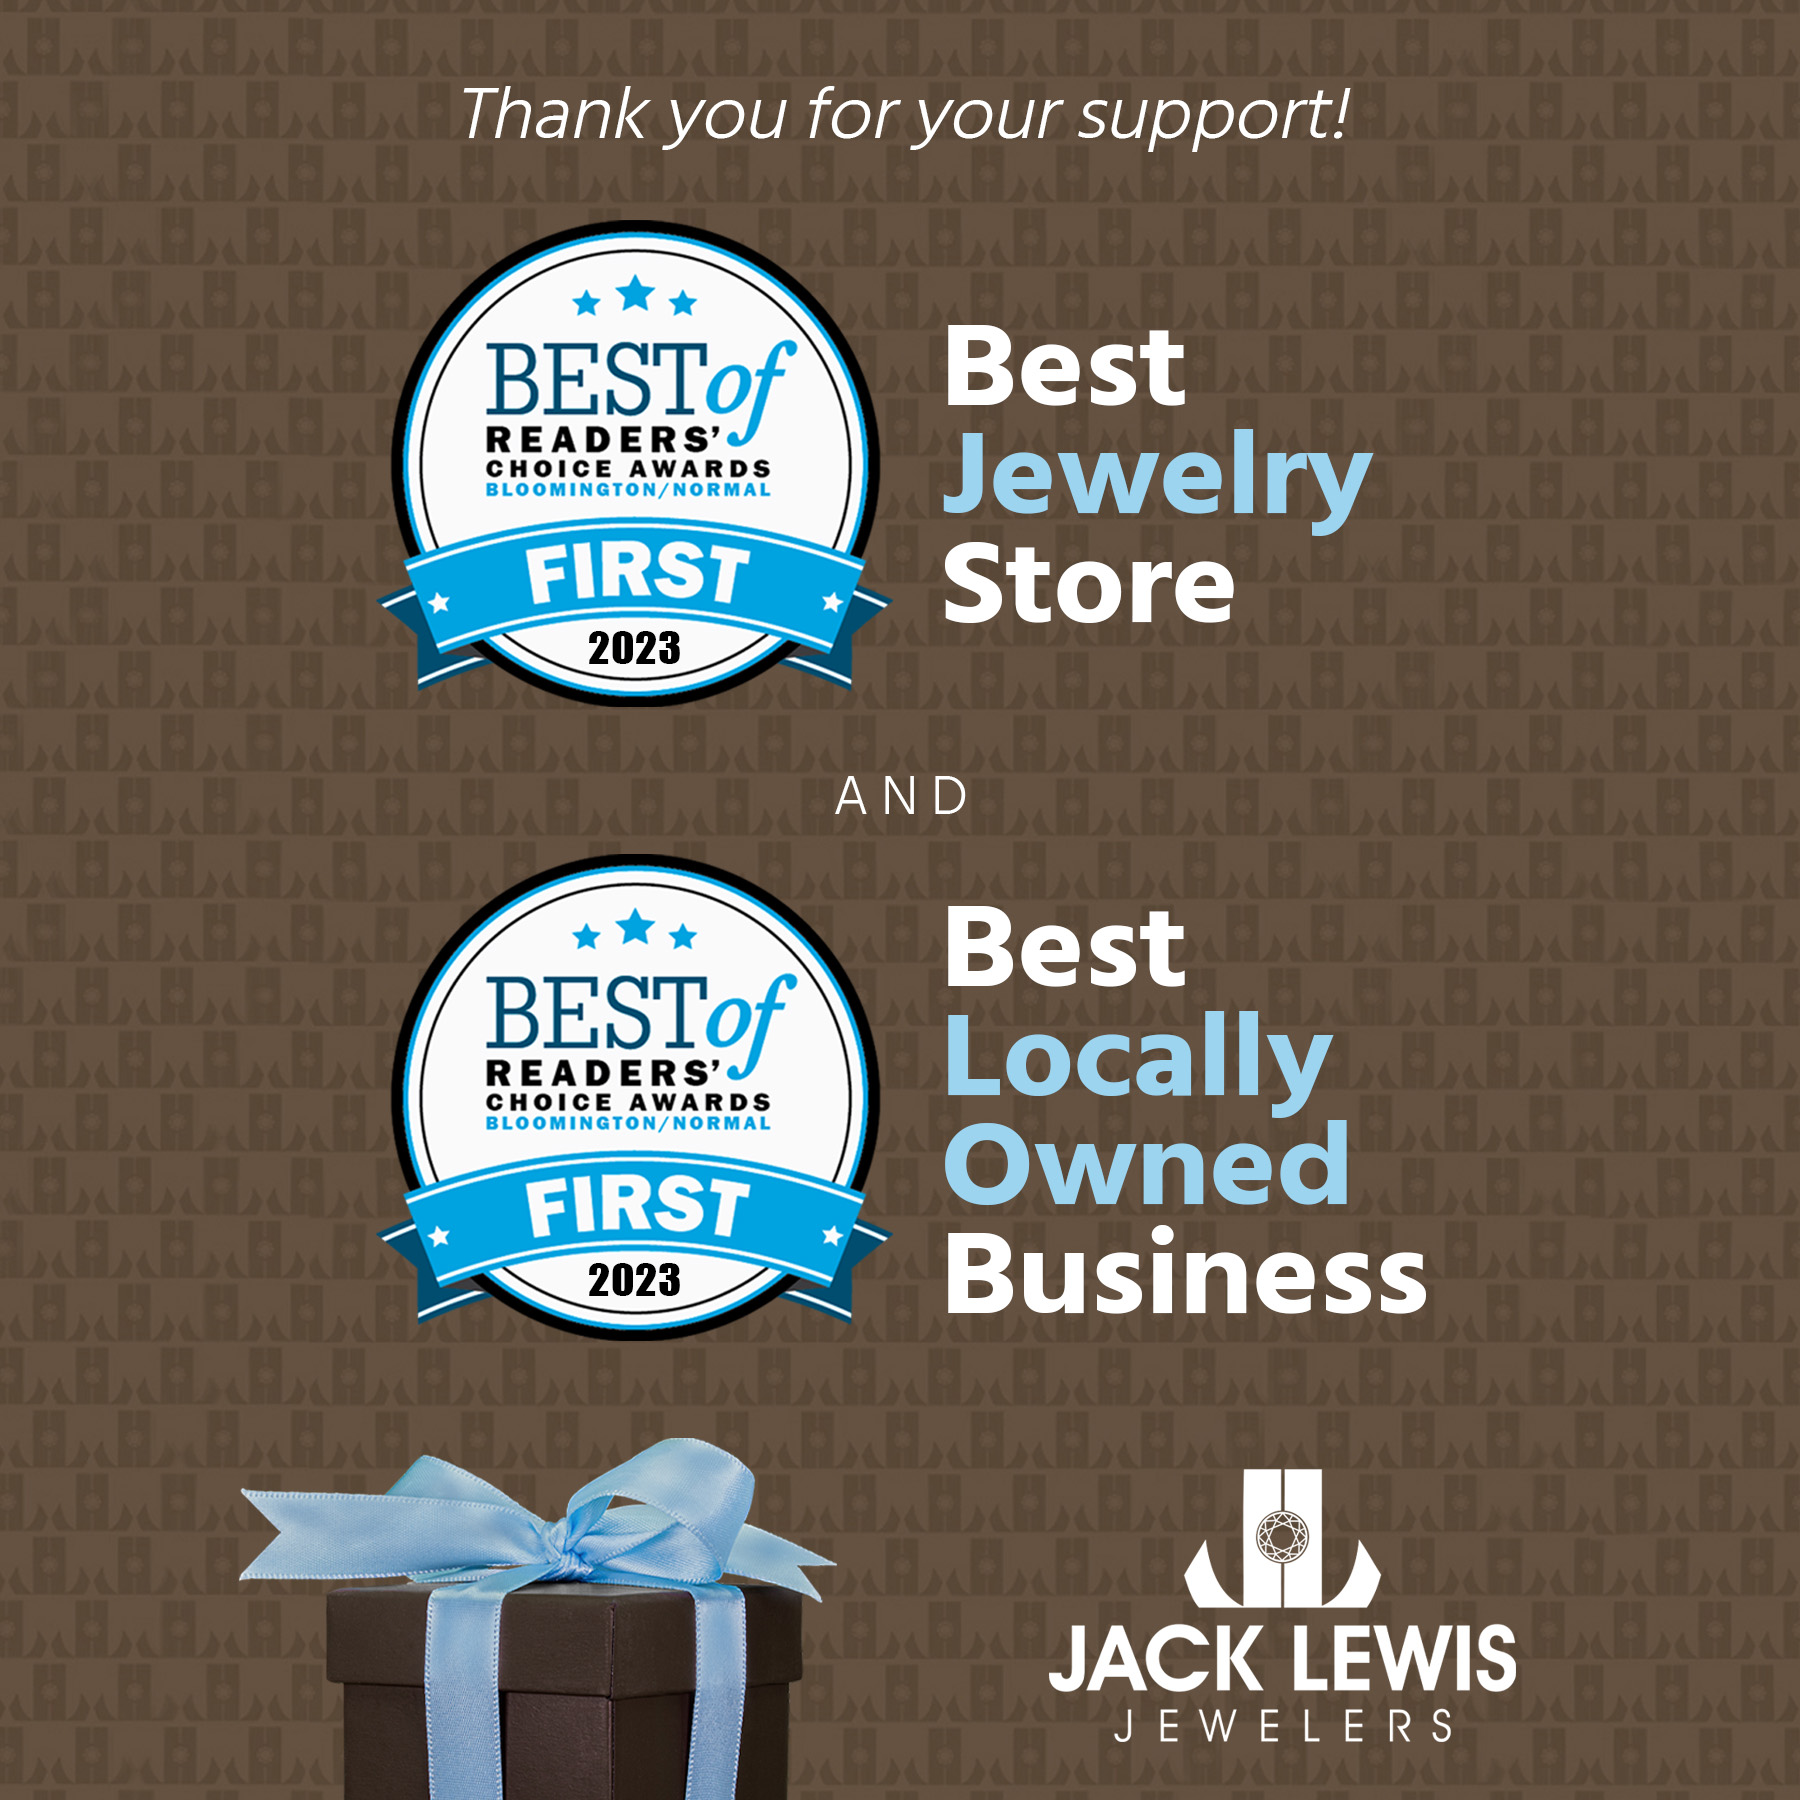 2023 Award Winner for the Best Jewelry Store and Best Locally Owned Business in Bloomington-Normal, Illinois.